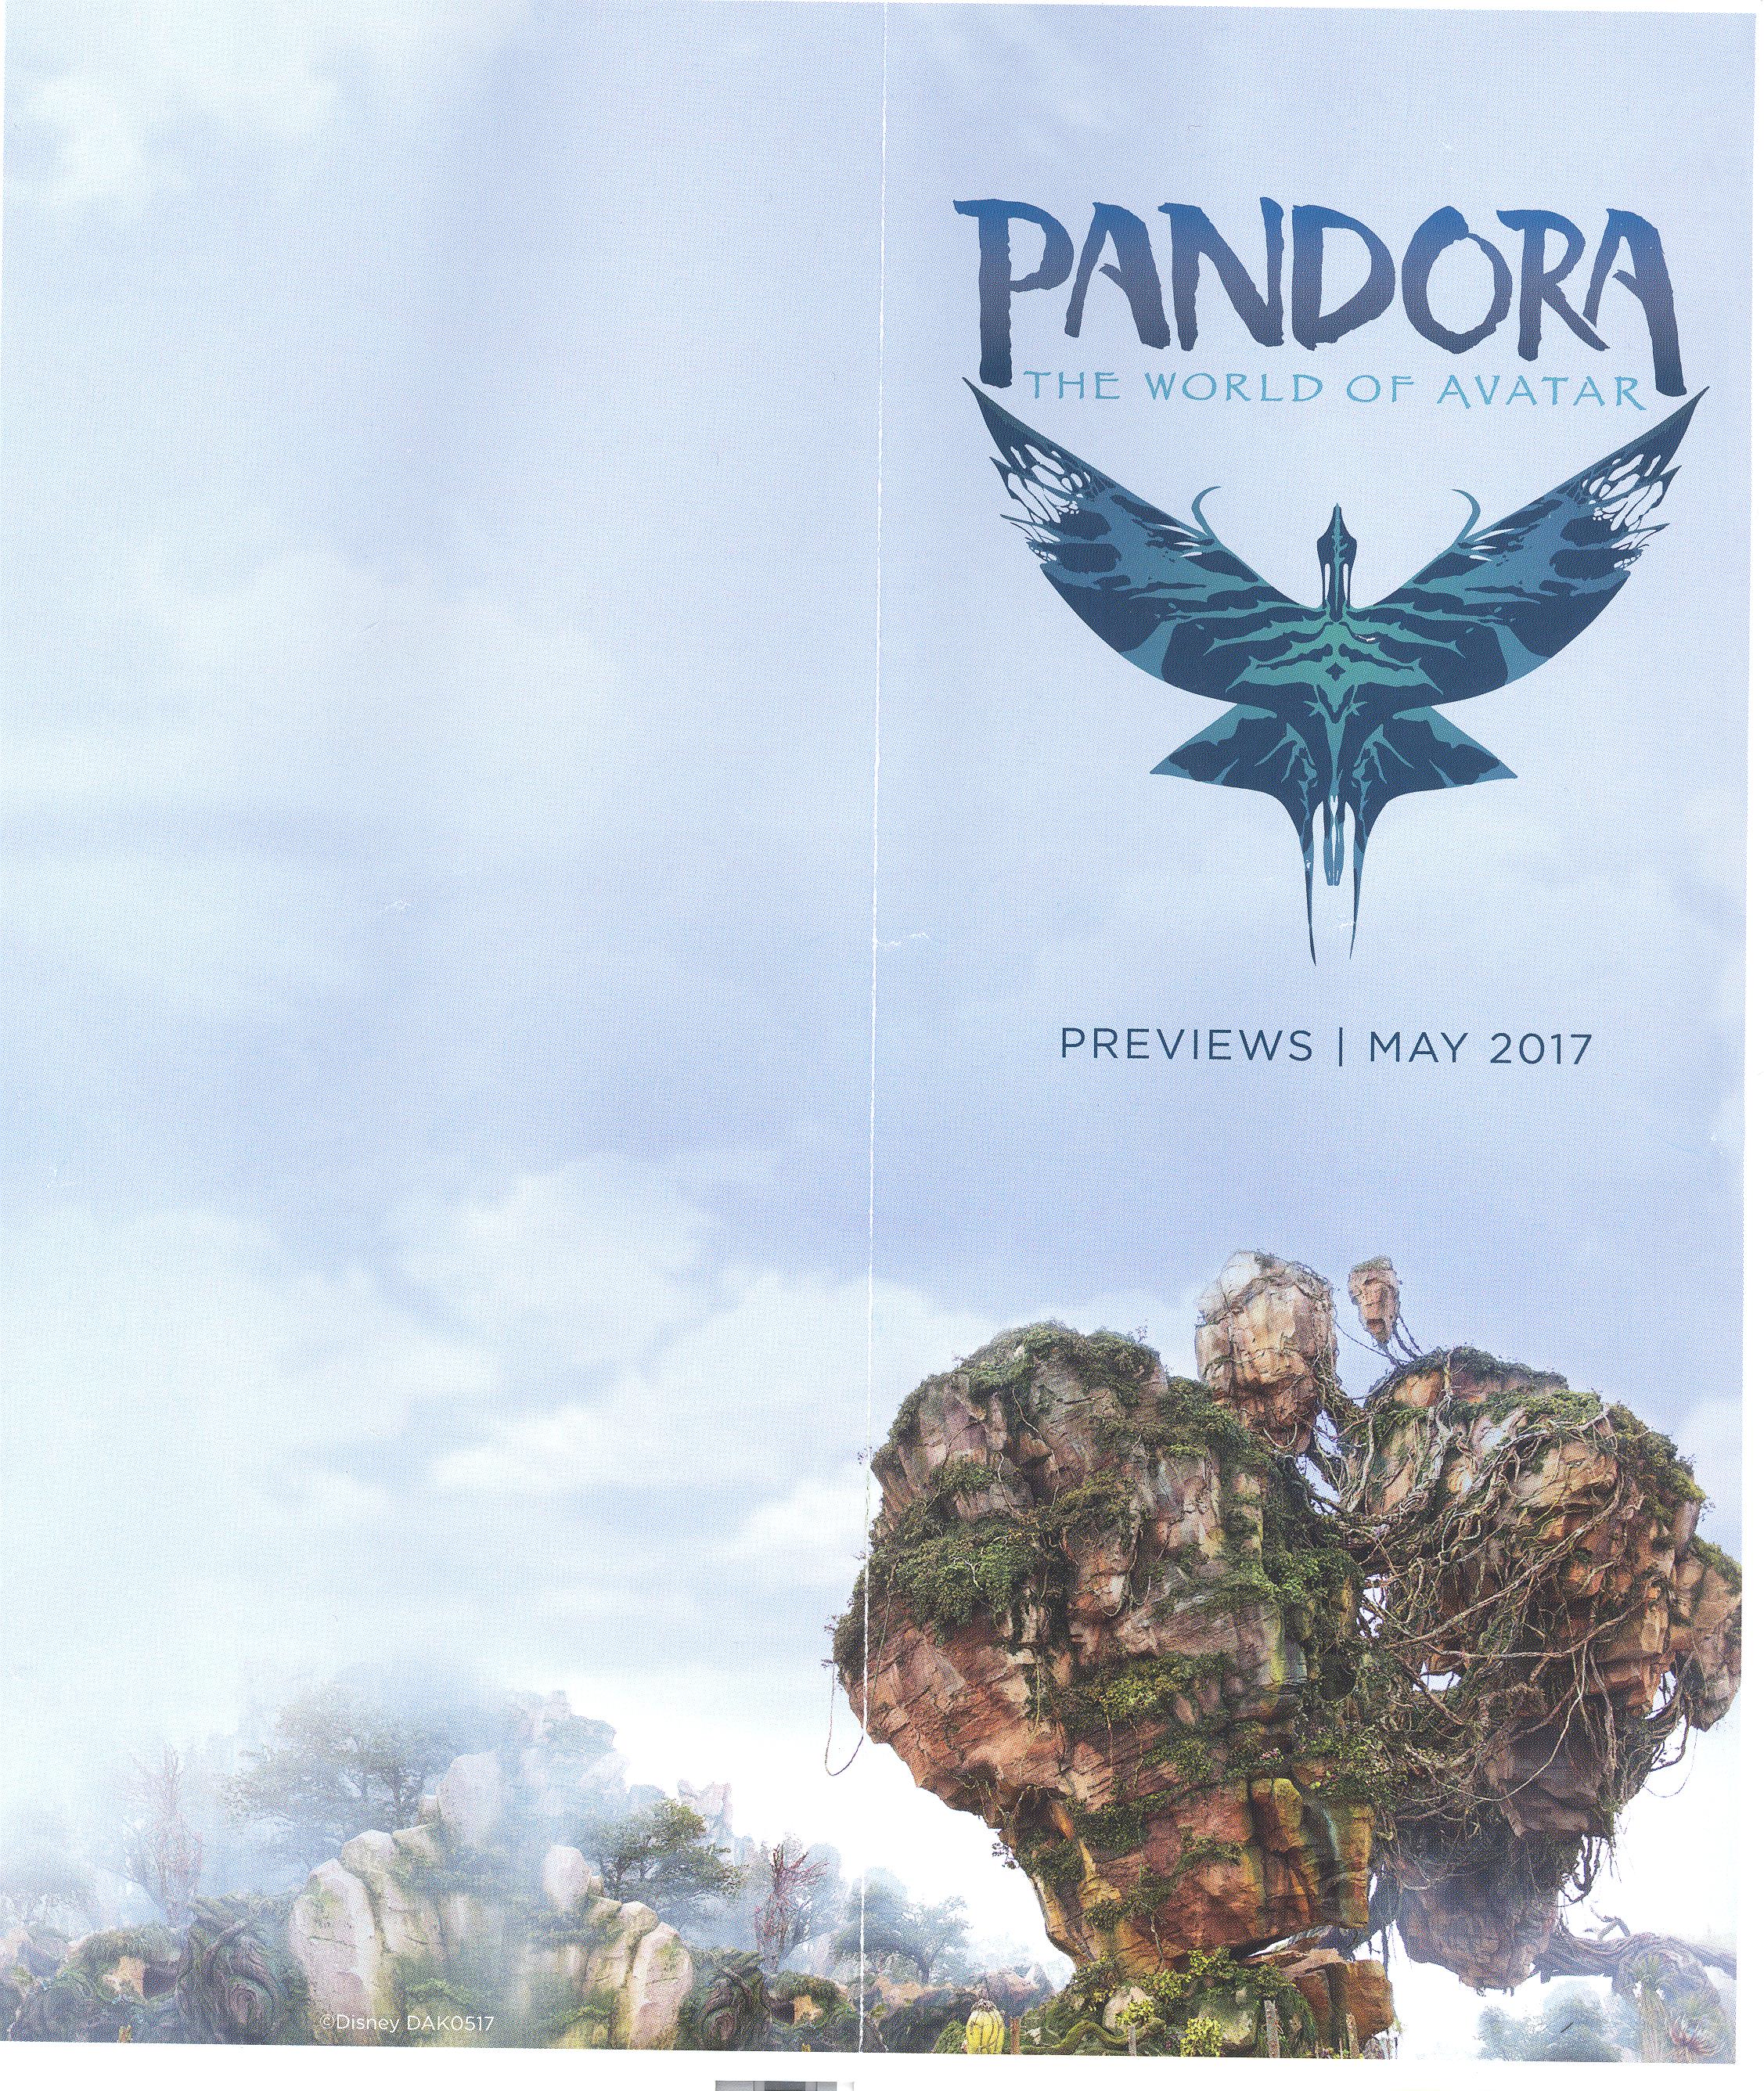 Pandora The World of Avatar Preview Map